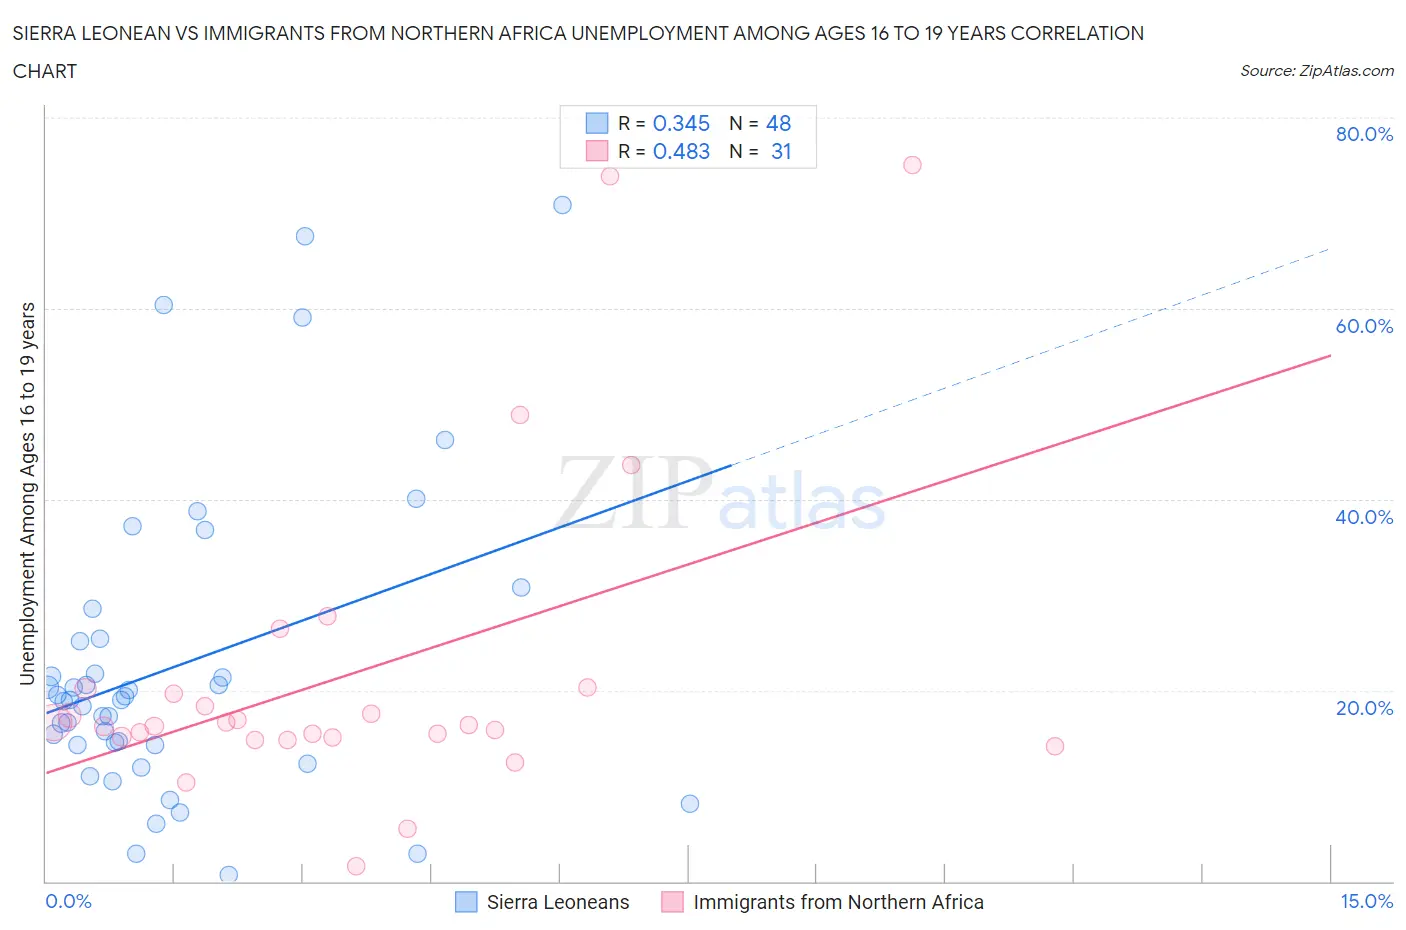 Sierra Leonean vs Immigrants from Northern Africa Unemployment Among Ages 16 to 19 years